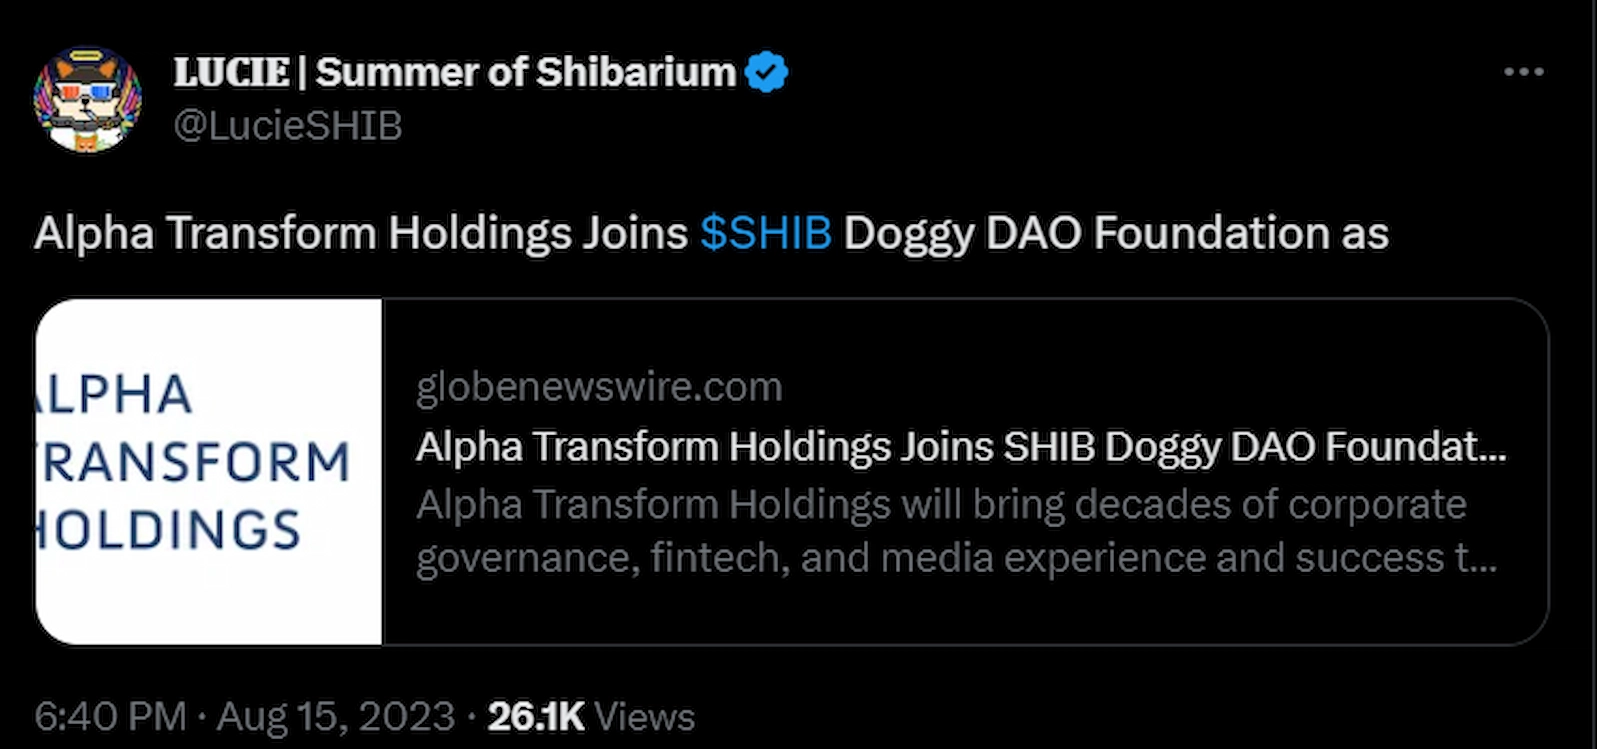 Shiba Inu partnered with Alpha Transform Holdings for the Shibarium launch.